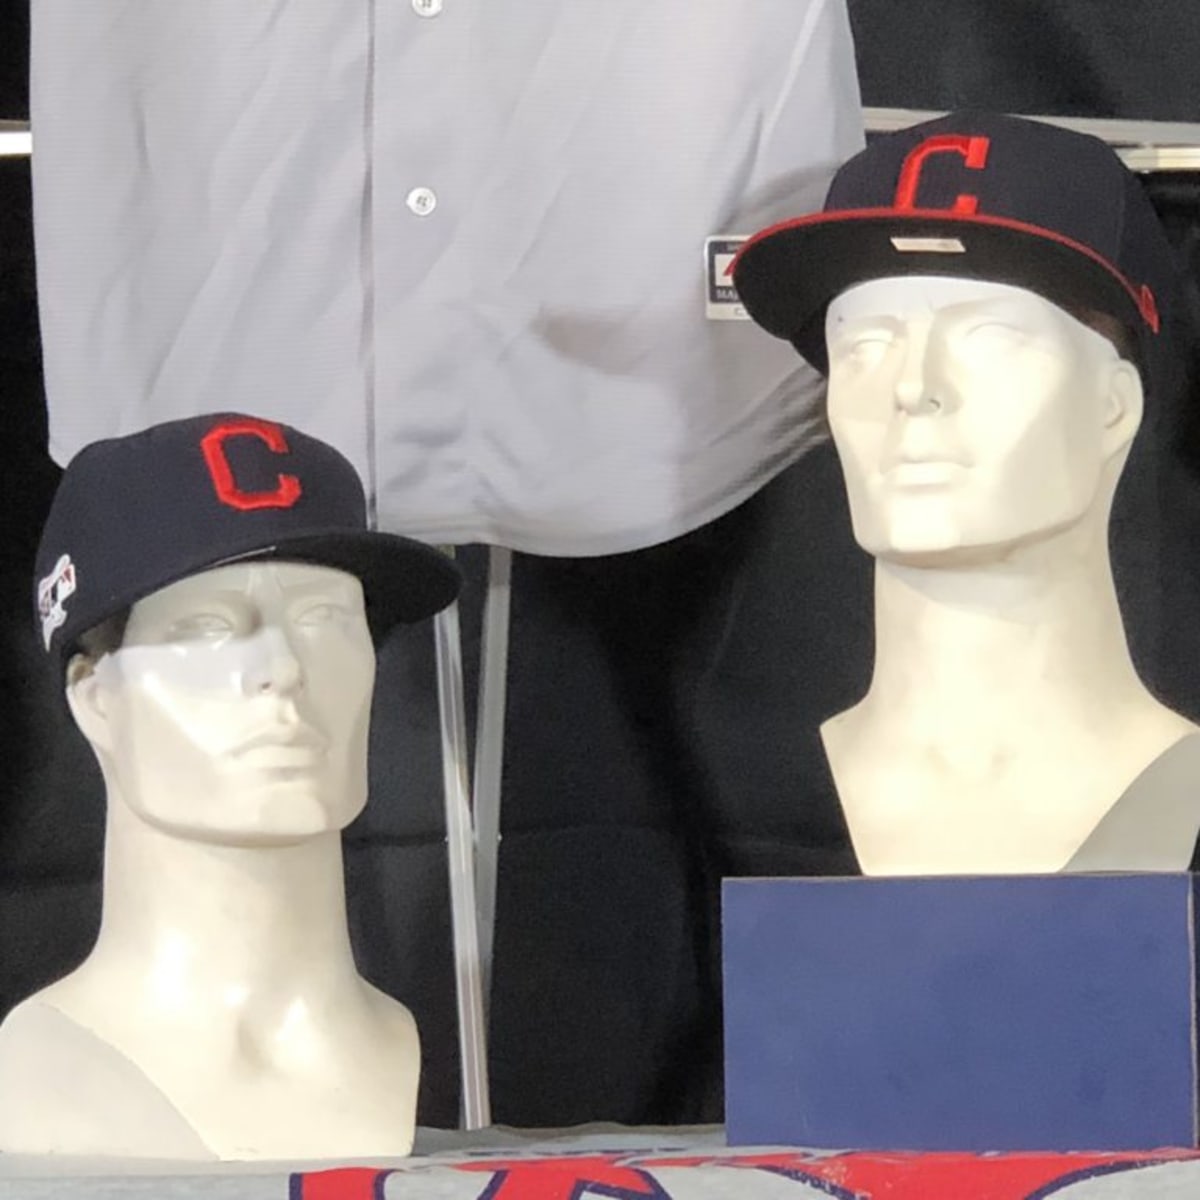 MLB unveils hats, jerseys for 2019 All-Star Game in Cleveland 